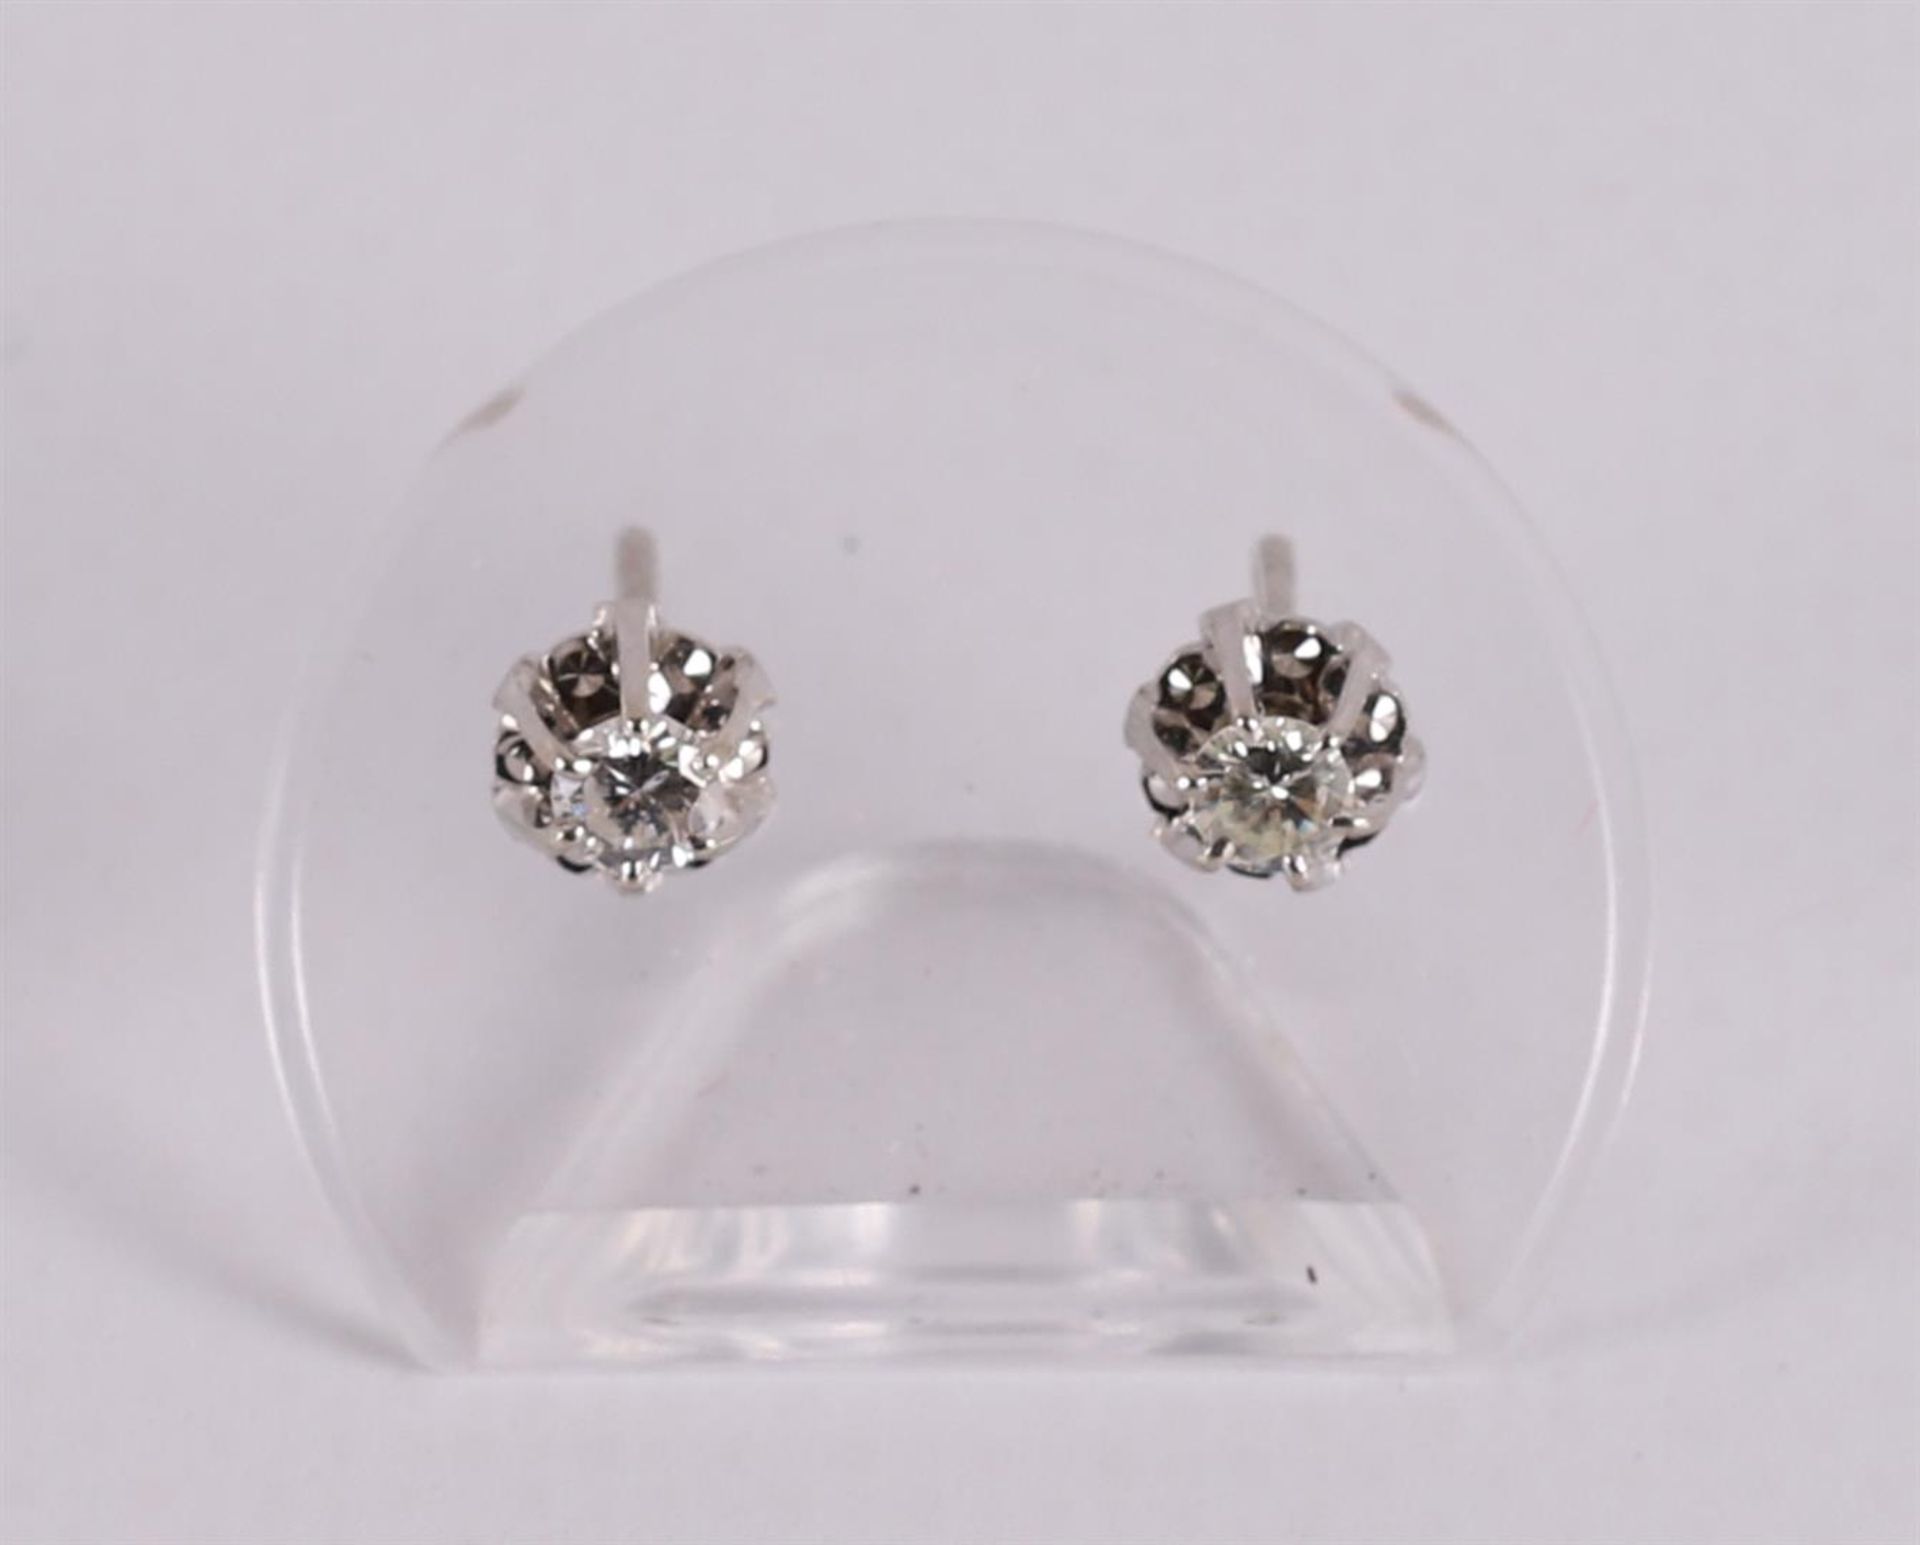 A pair of 14 kt gold stud earrings with 2 brilliant cut diamonds.